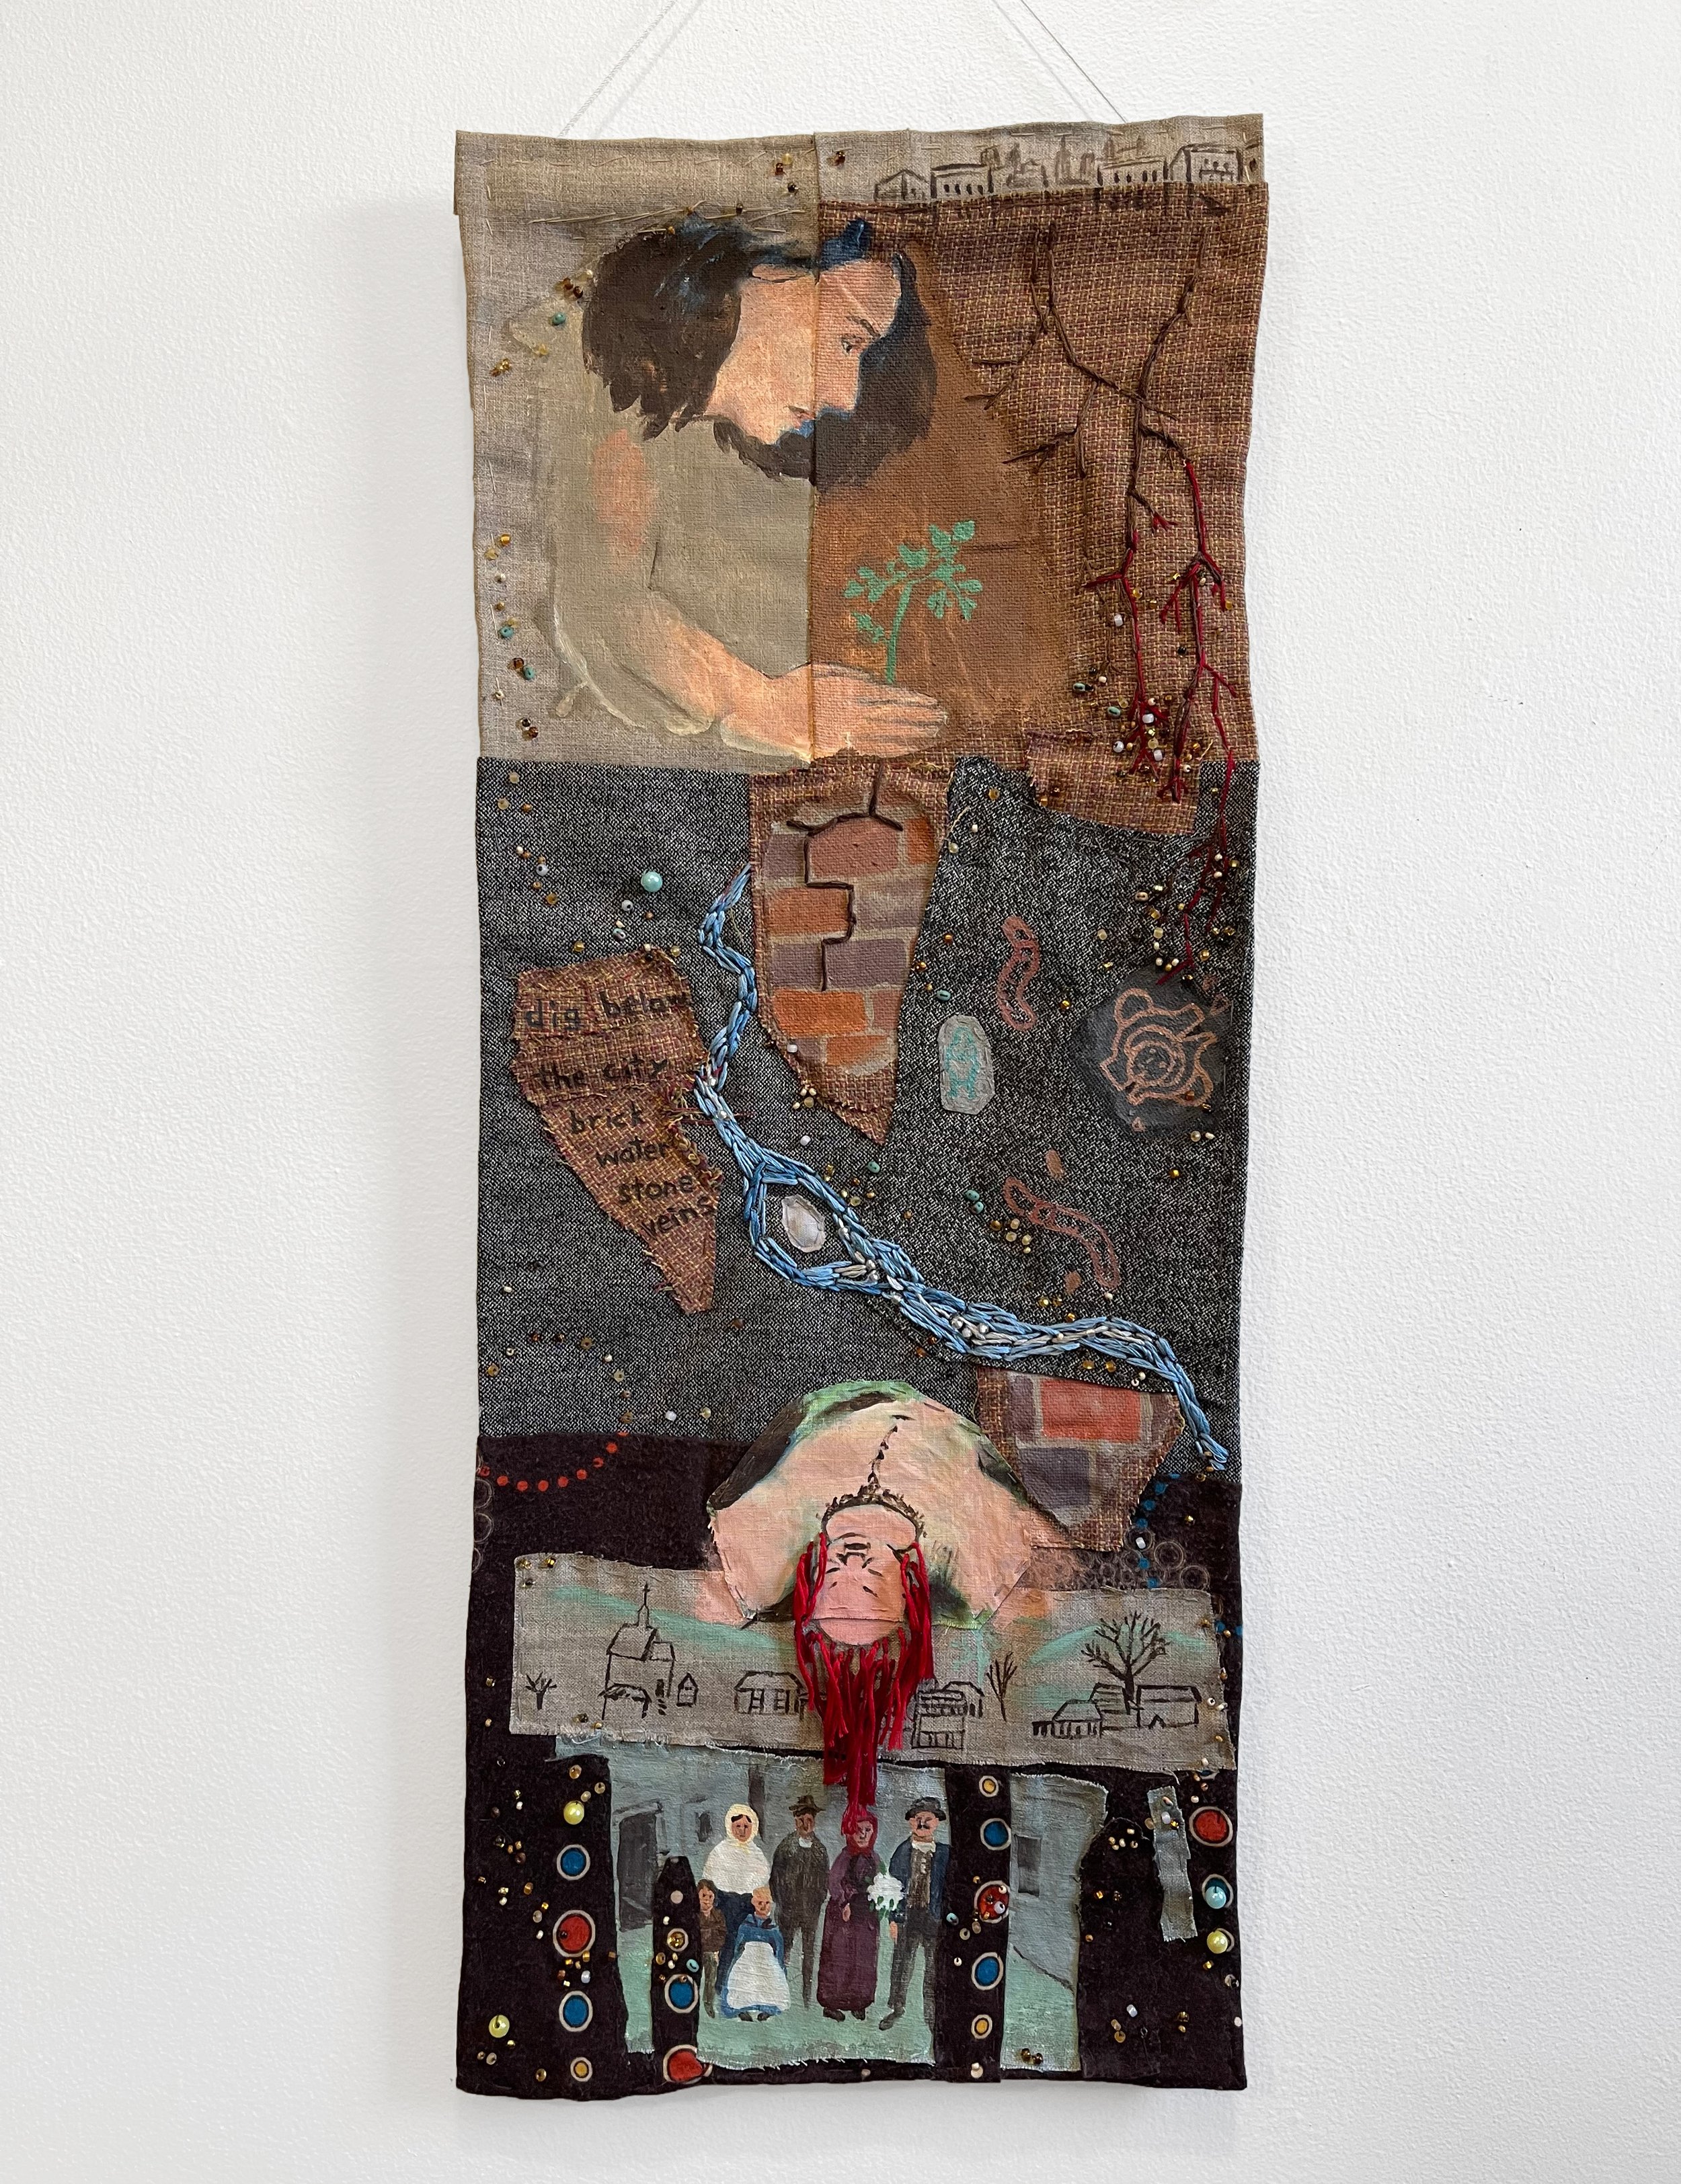  “Bricks under the asphalt”, 30”h x 12”w, Acrylic, embroidery, and beading on repurposed fabric, 2024 